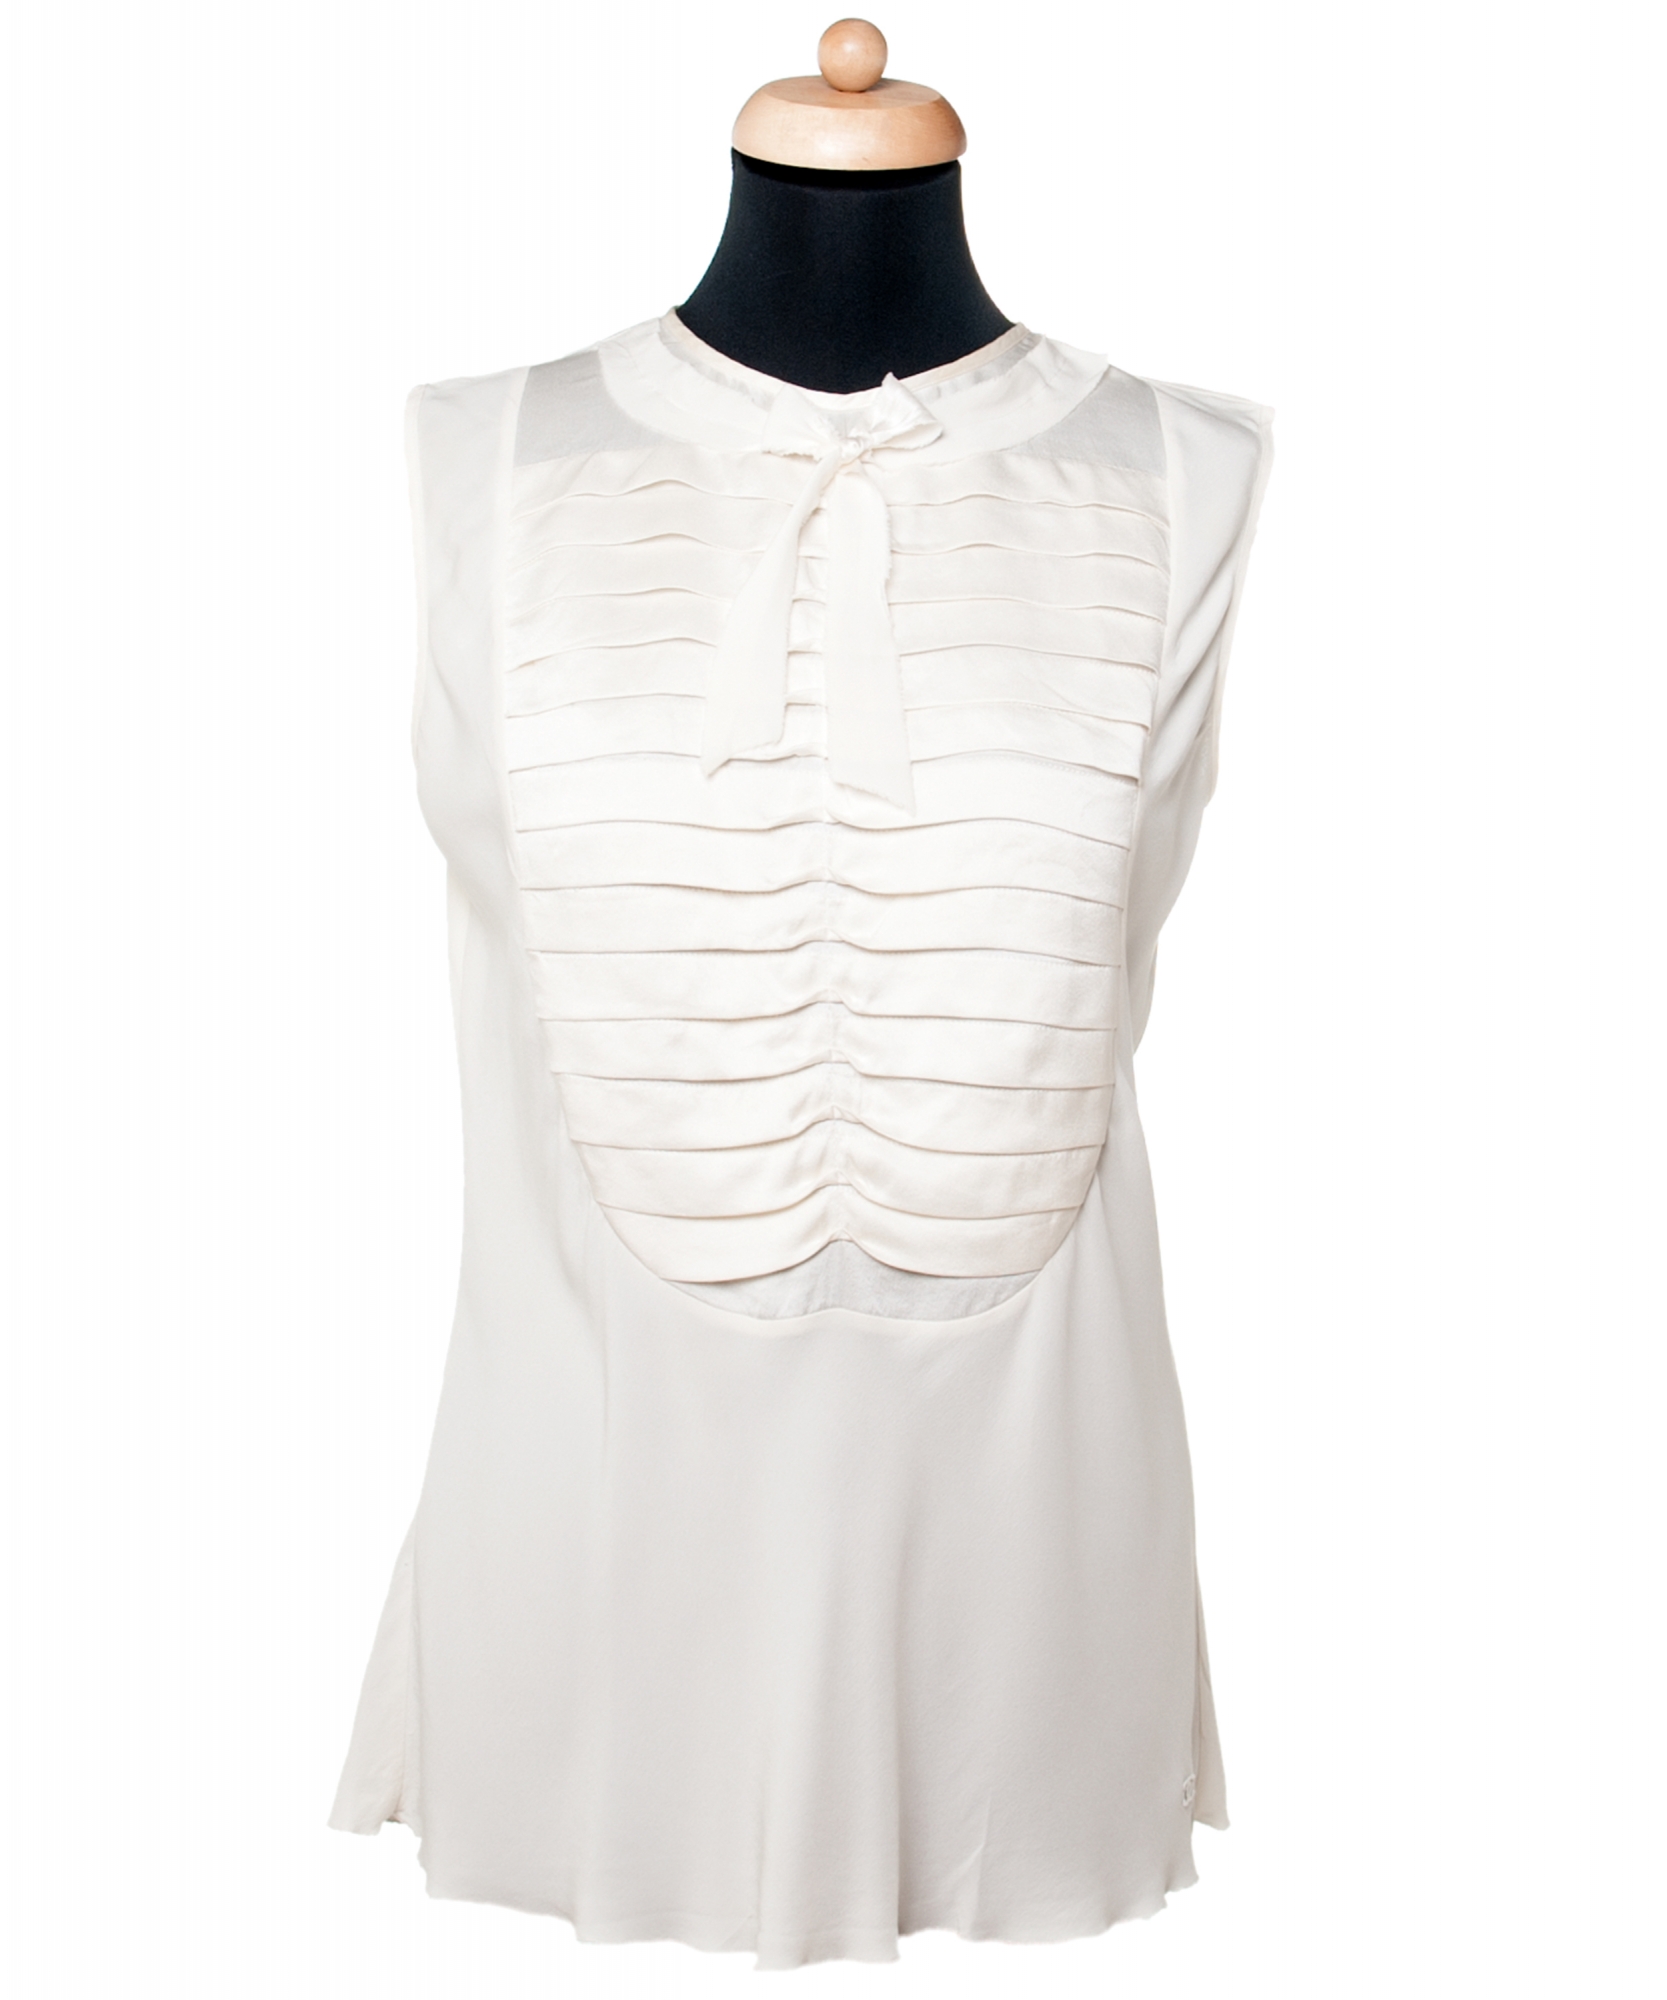 Chanel White Silk Sleeveless Pleated Bow Blouse - Chanel